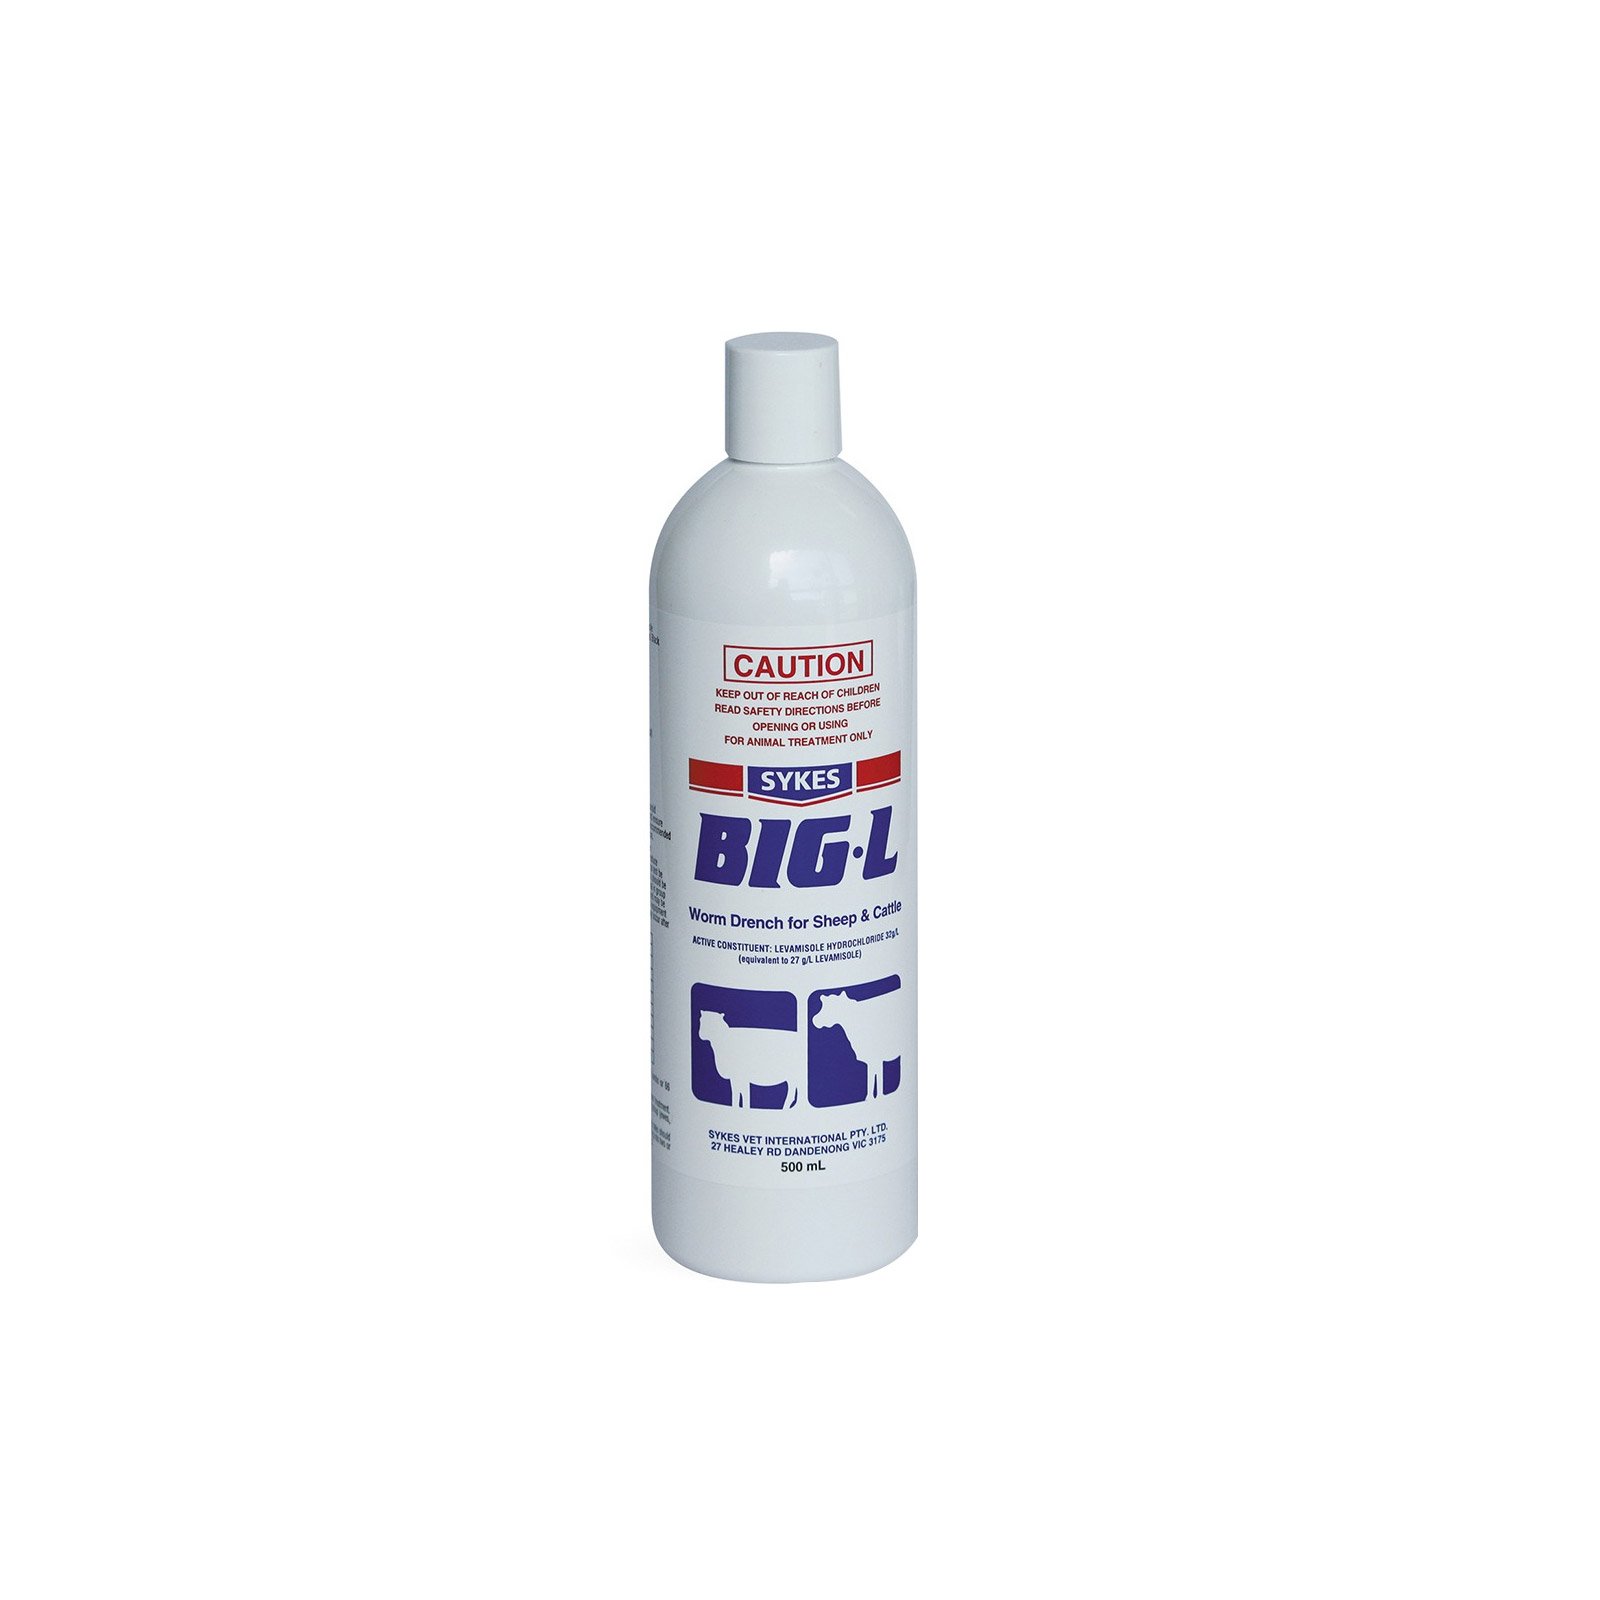 Big L Wormer for Sheep & Cattle